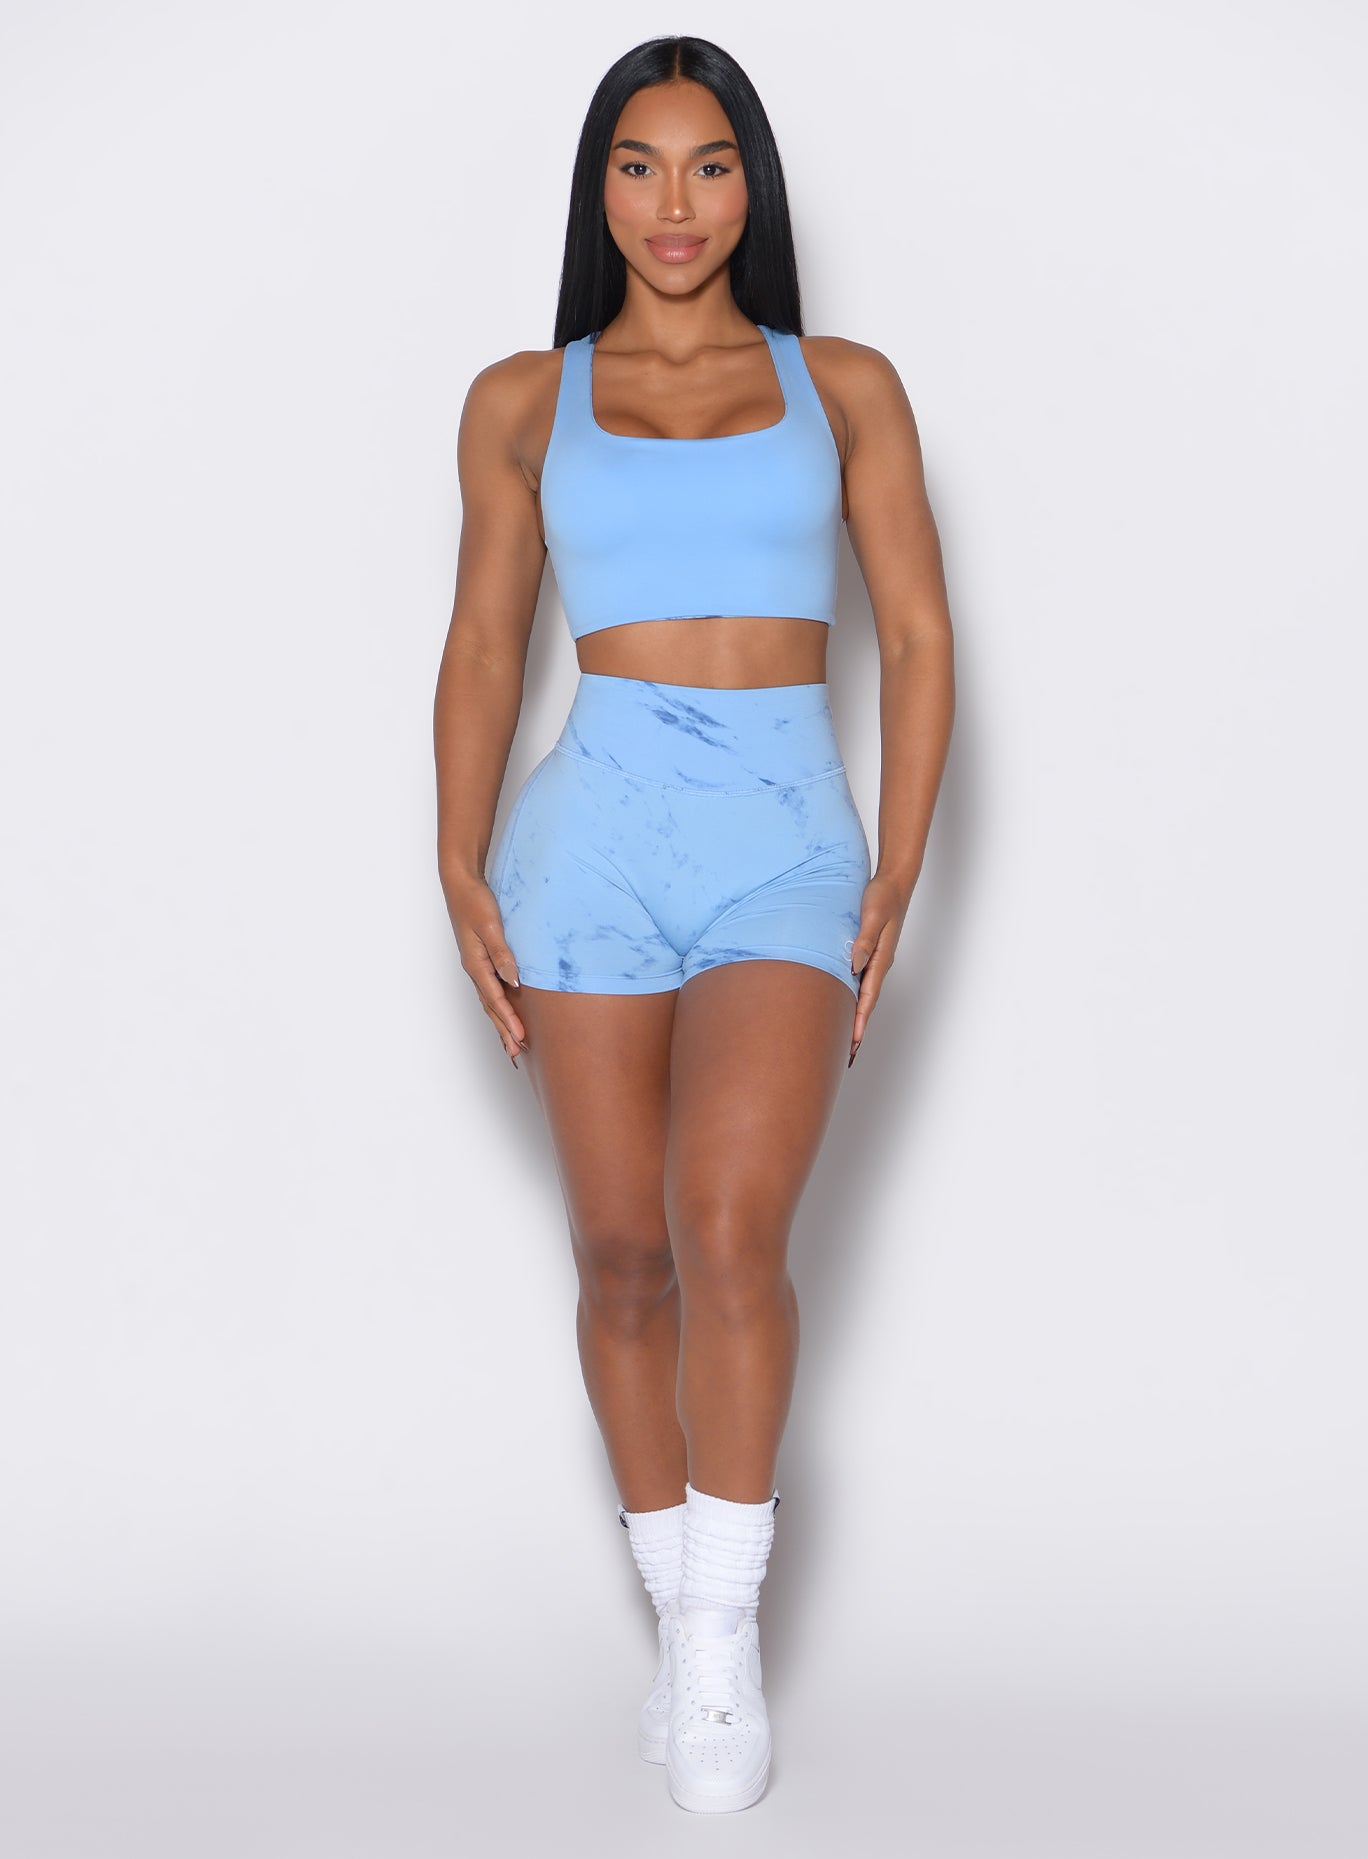 model facing forward wearing our fit marble shorts in blue jay color along with the matching sports bra